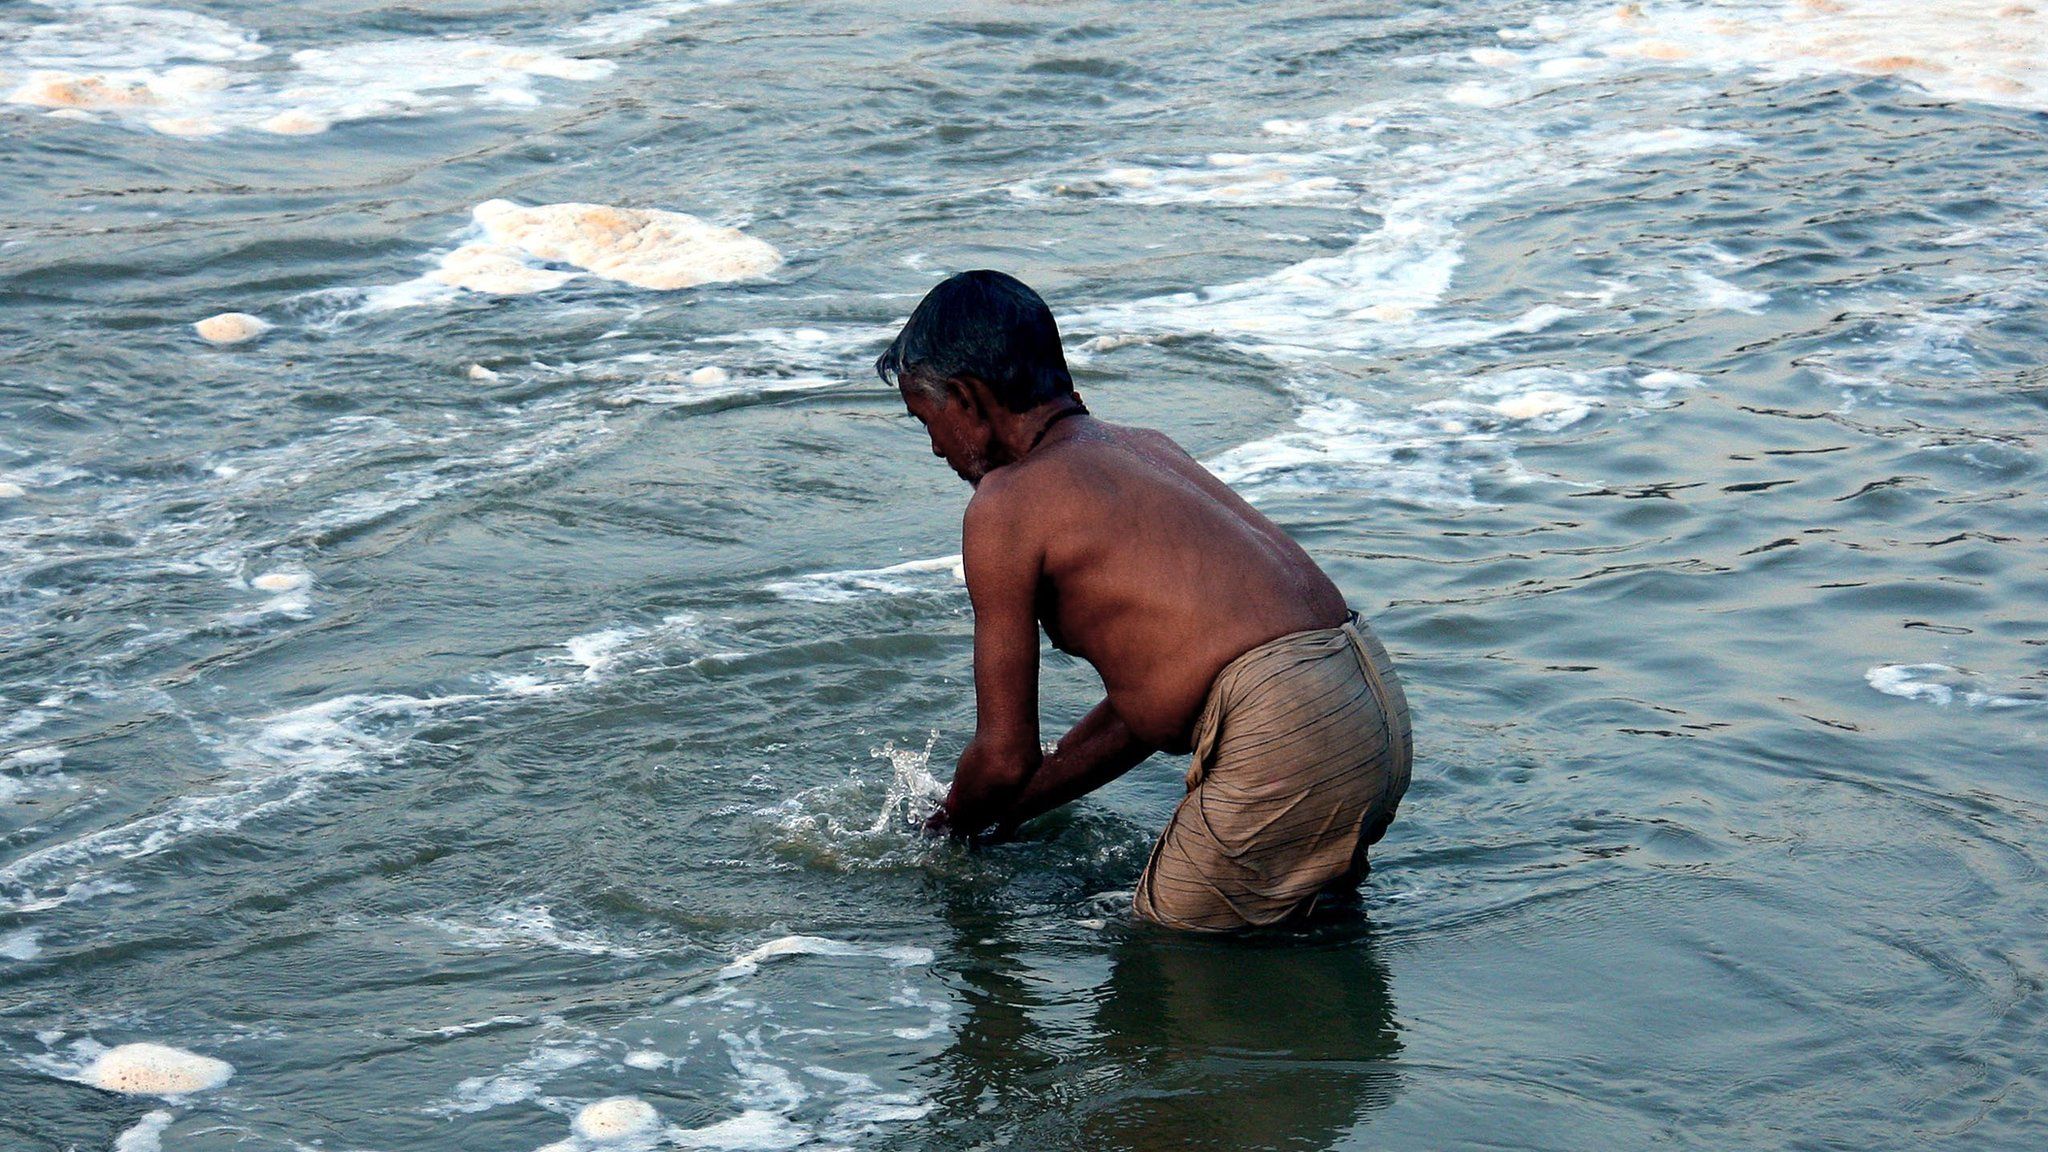 The Ganges and Yamuna rivers are worshipped by millions, but they are also heavily polluted